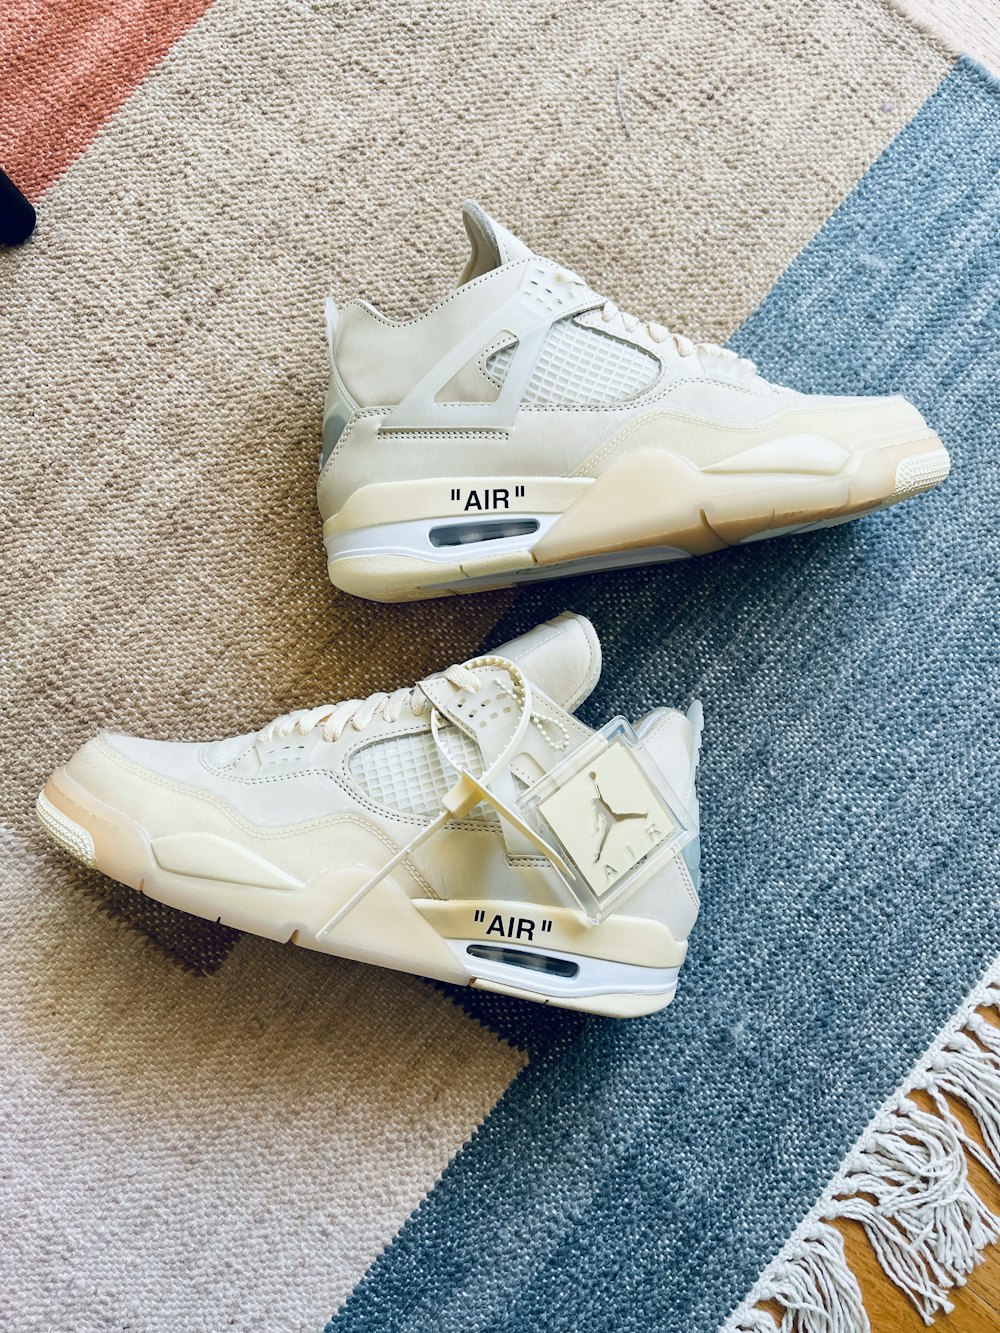 Air Jordan 5 Off White Sail Review and On Foot 